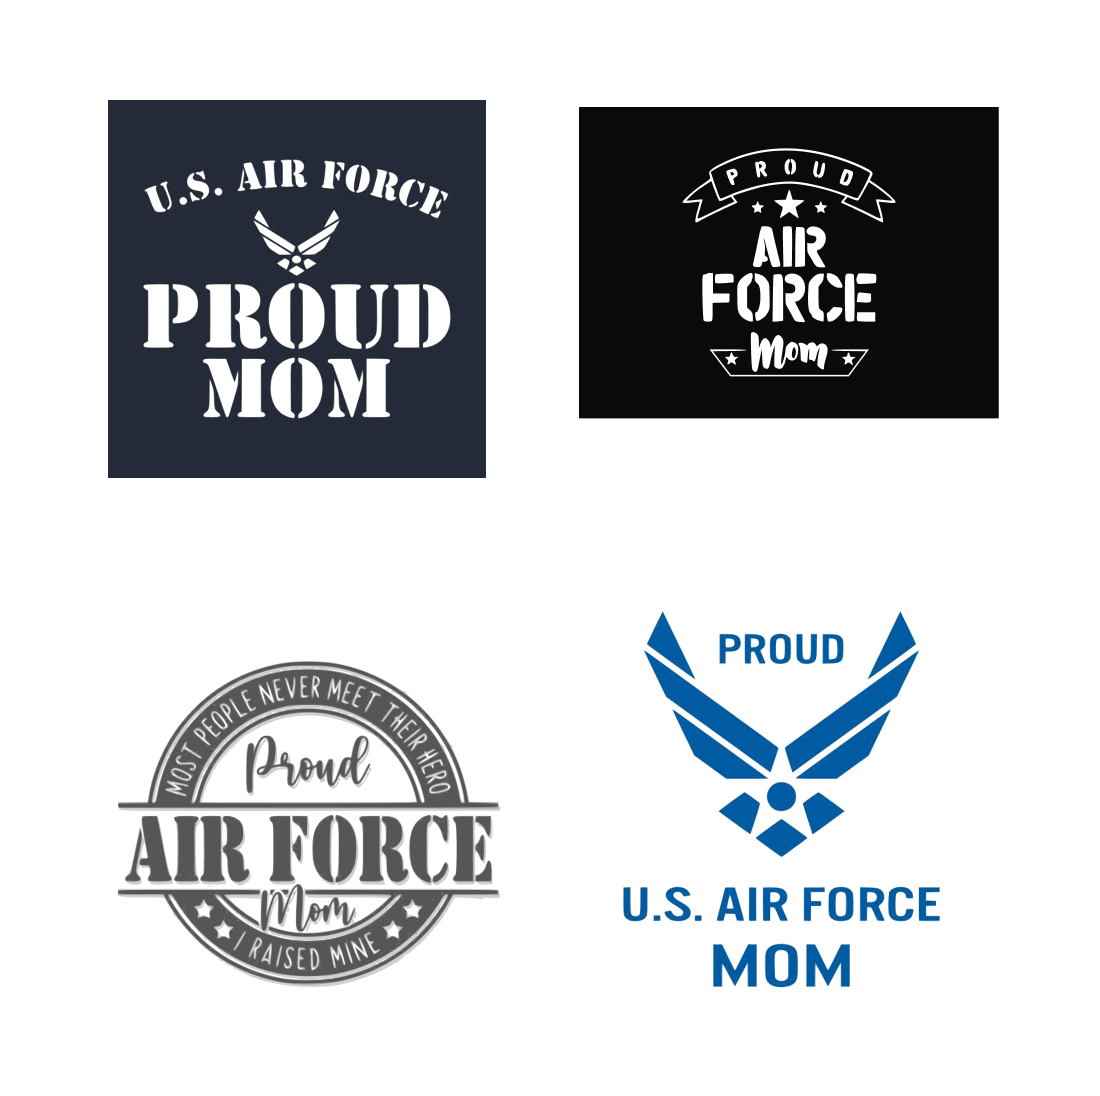 Four pictures with inscription "U.S. Air Force Proud Mom" on the dark and light backgrounds.